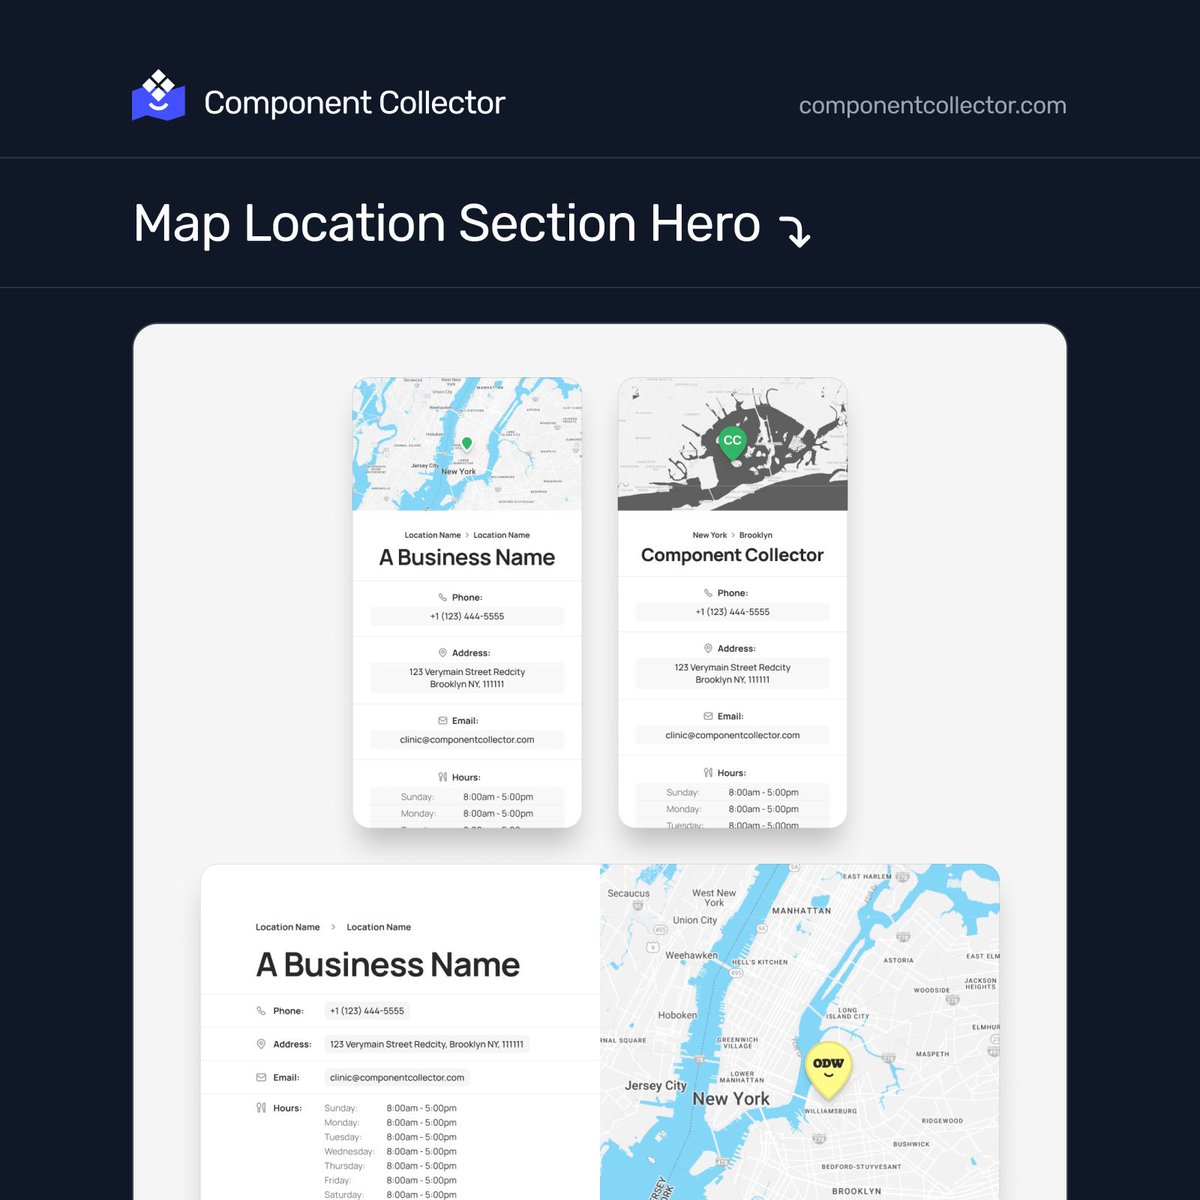 New Figma component! 🧨 Find it on Component Collector.
#figma #ui #uiux #component #designsystem #uidesign #componentcollector #buildinpublic #odw